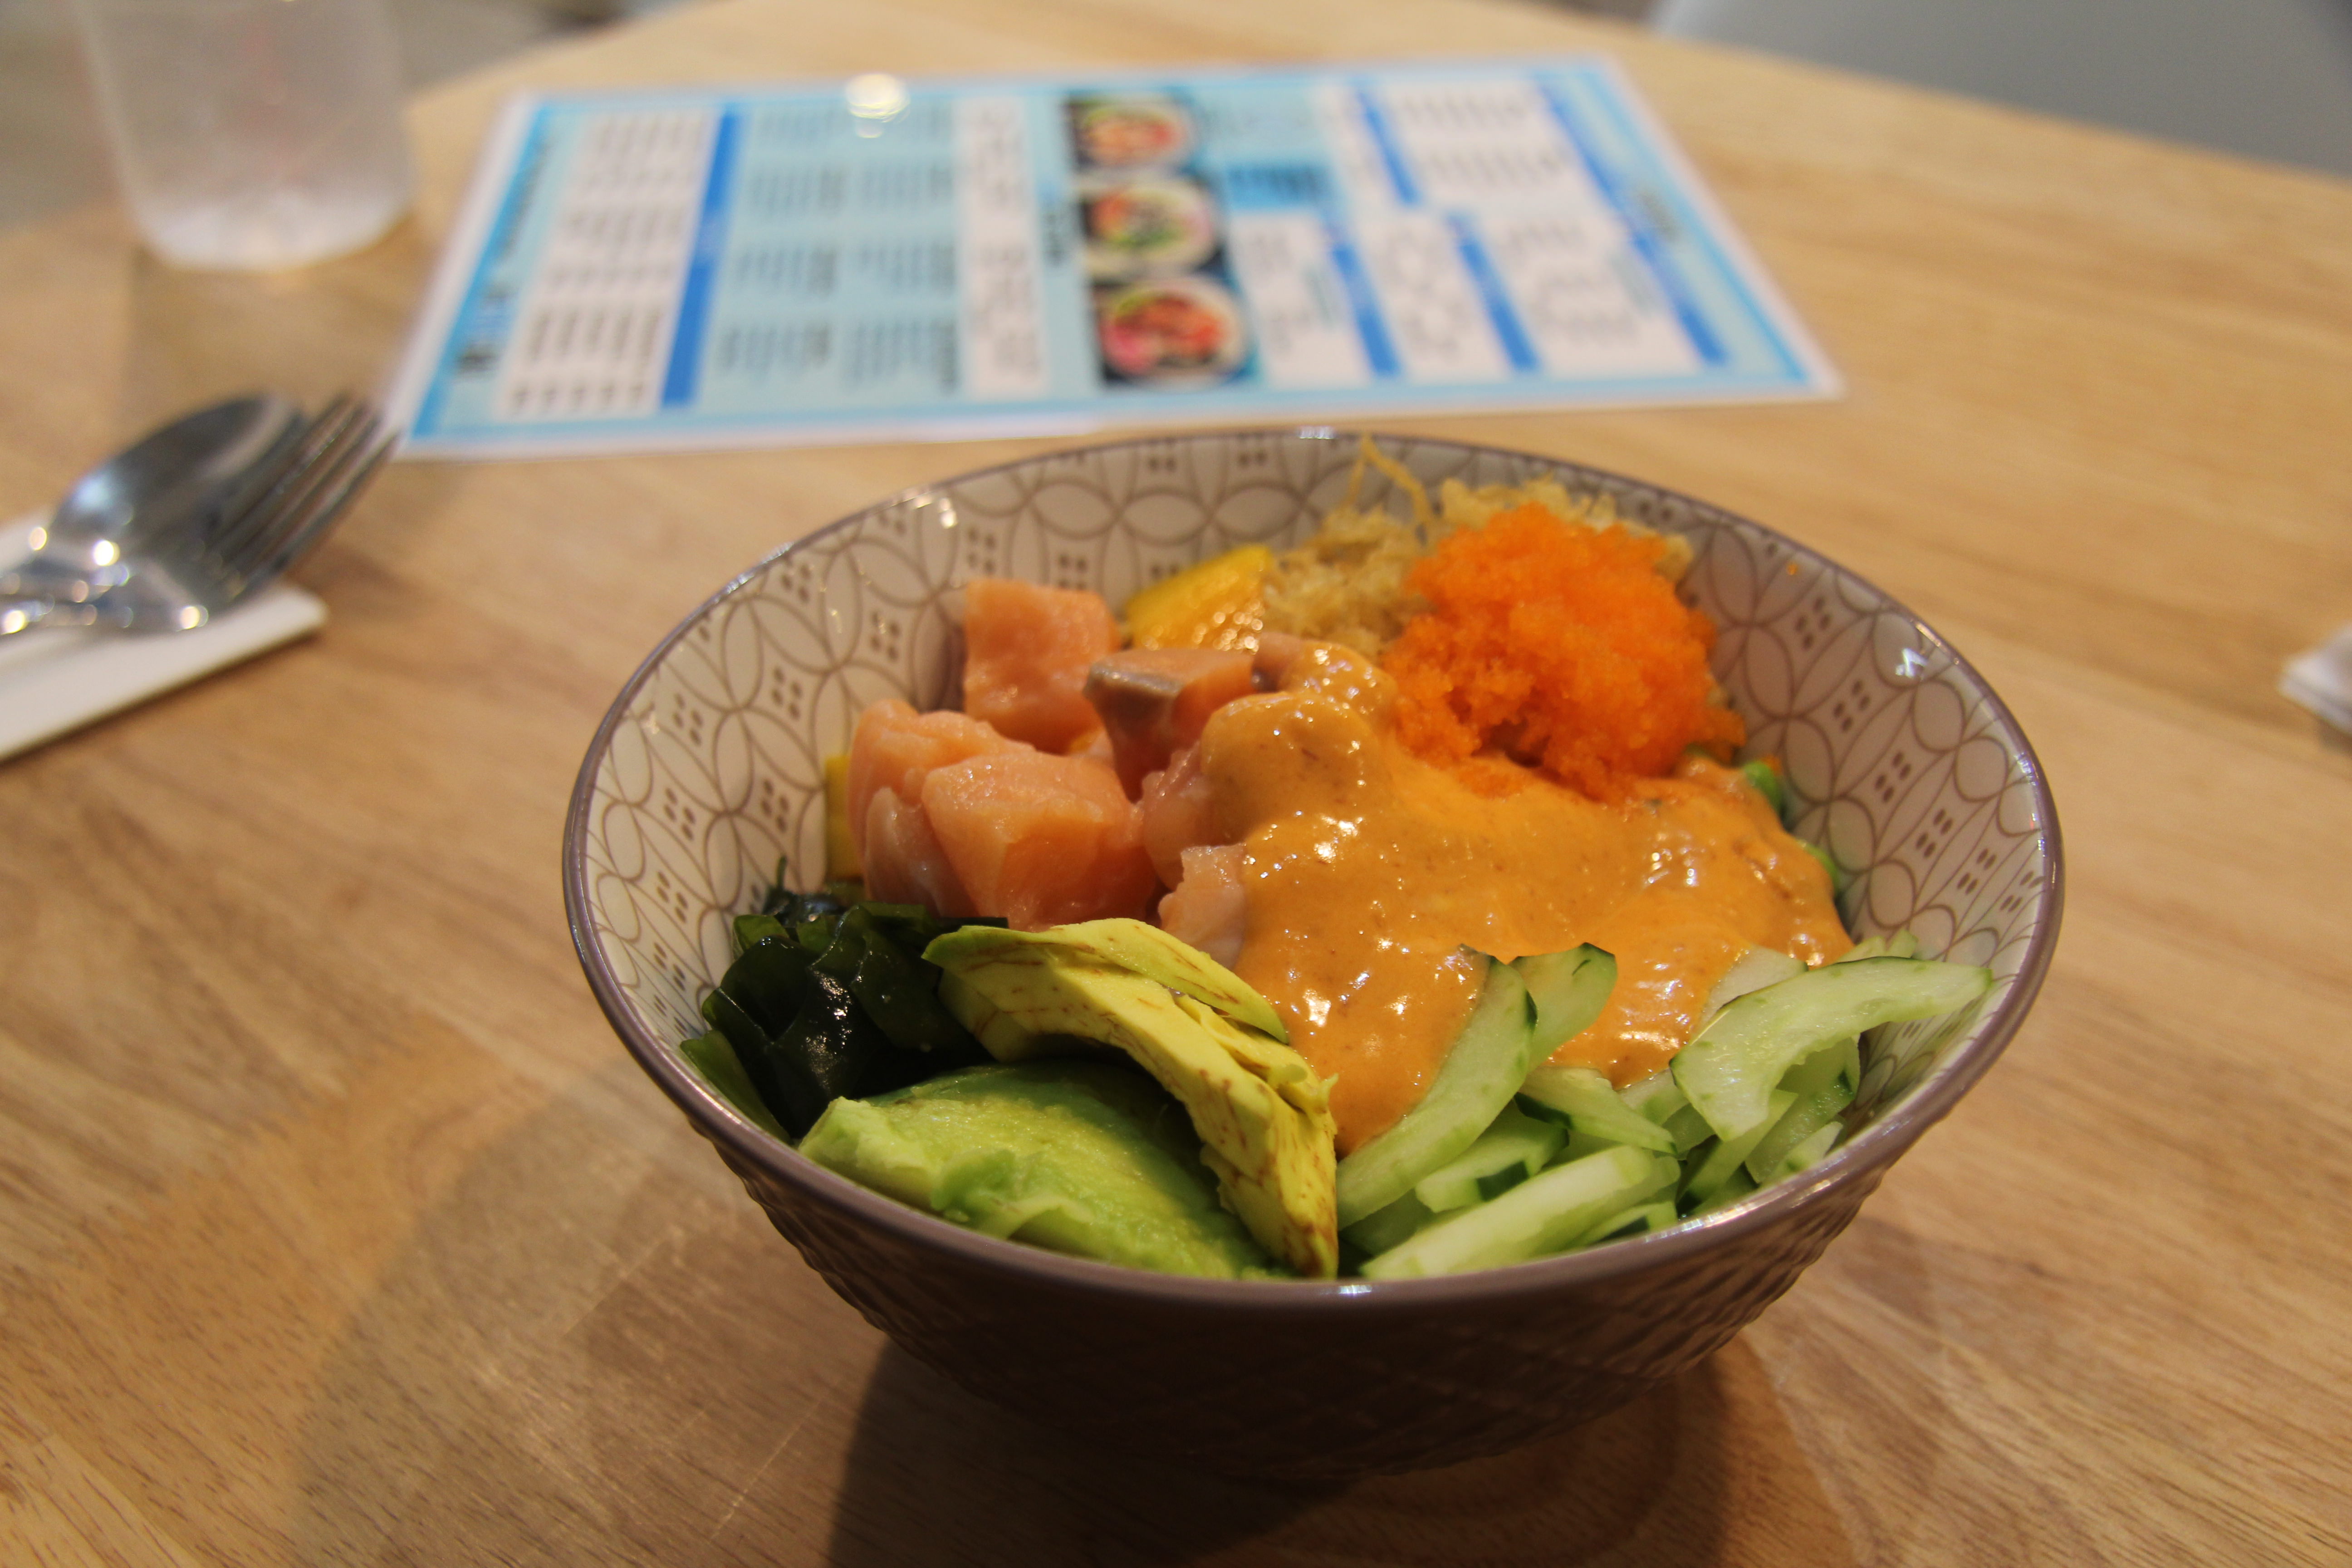 A salmon poke bowl with spicy aioli from the Poke Bar in Yangon. Photo: Coconuts Yangon